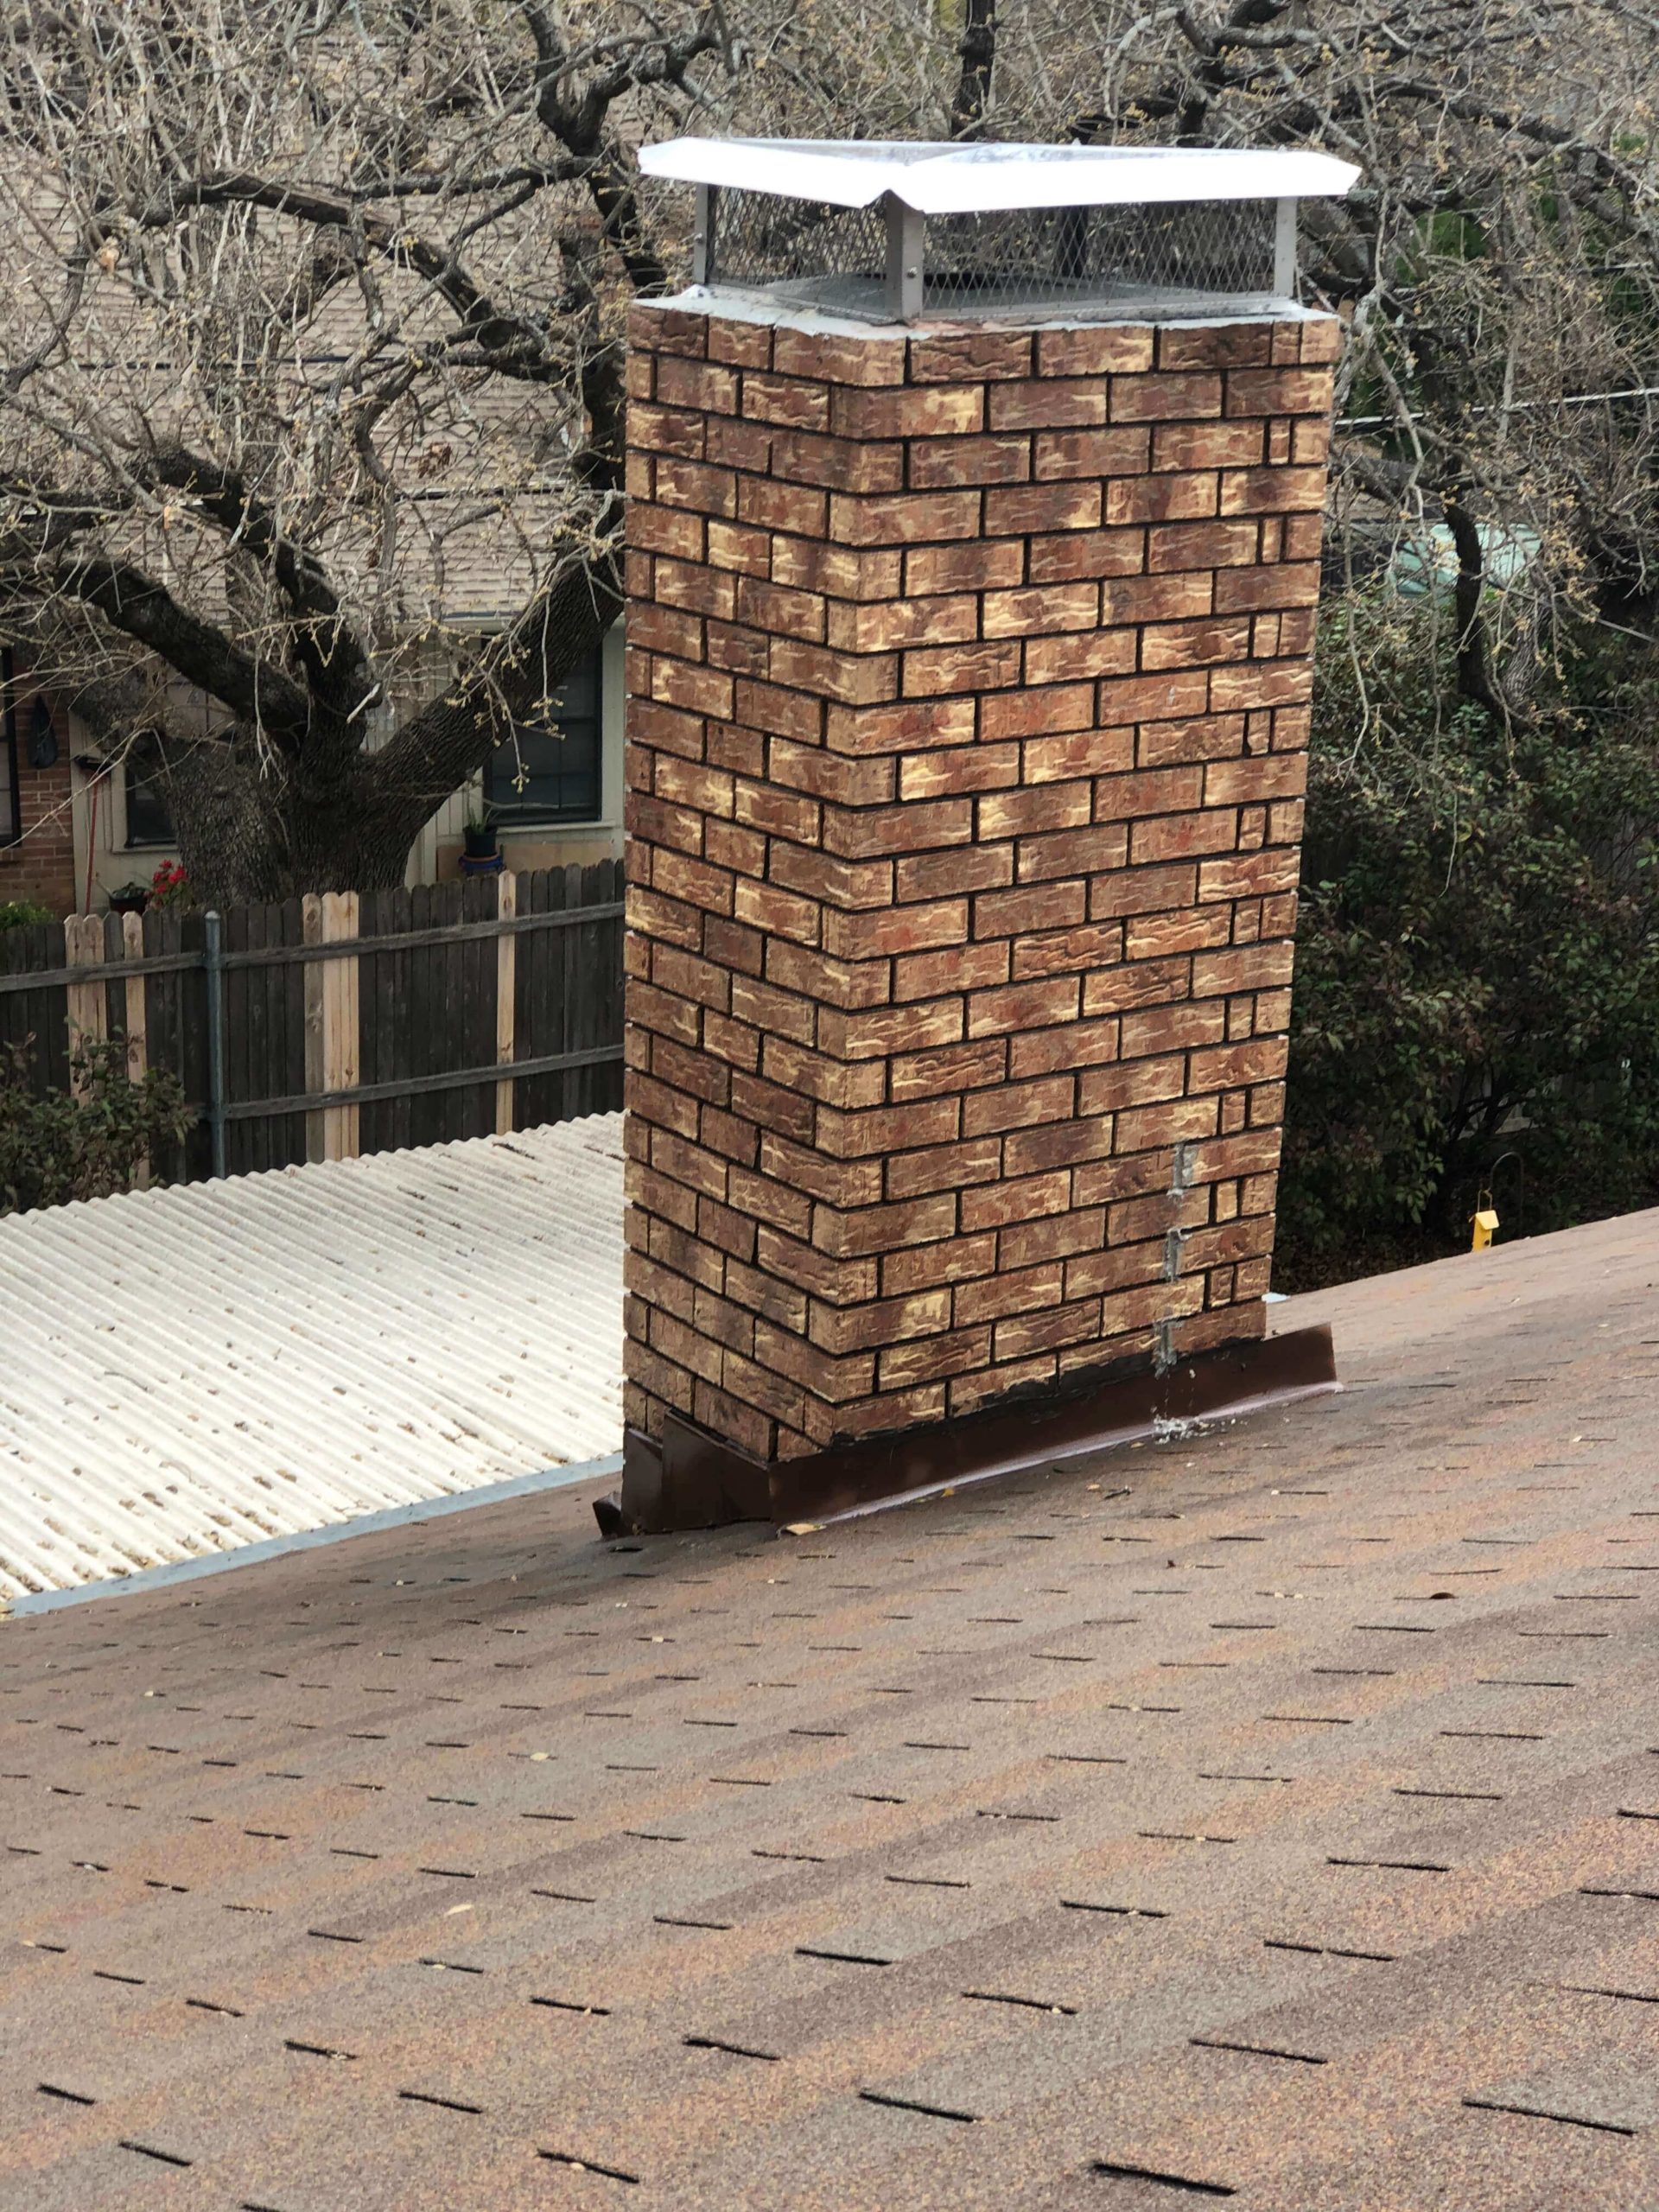 Chimney with chimney cap on roof